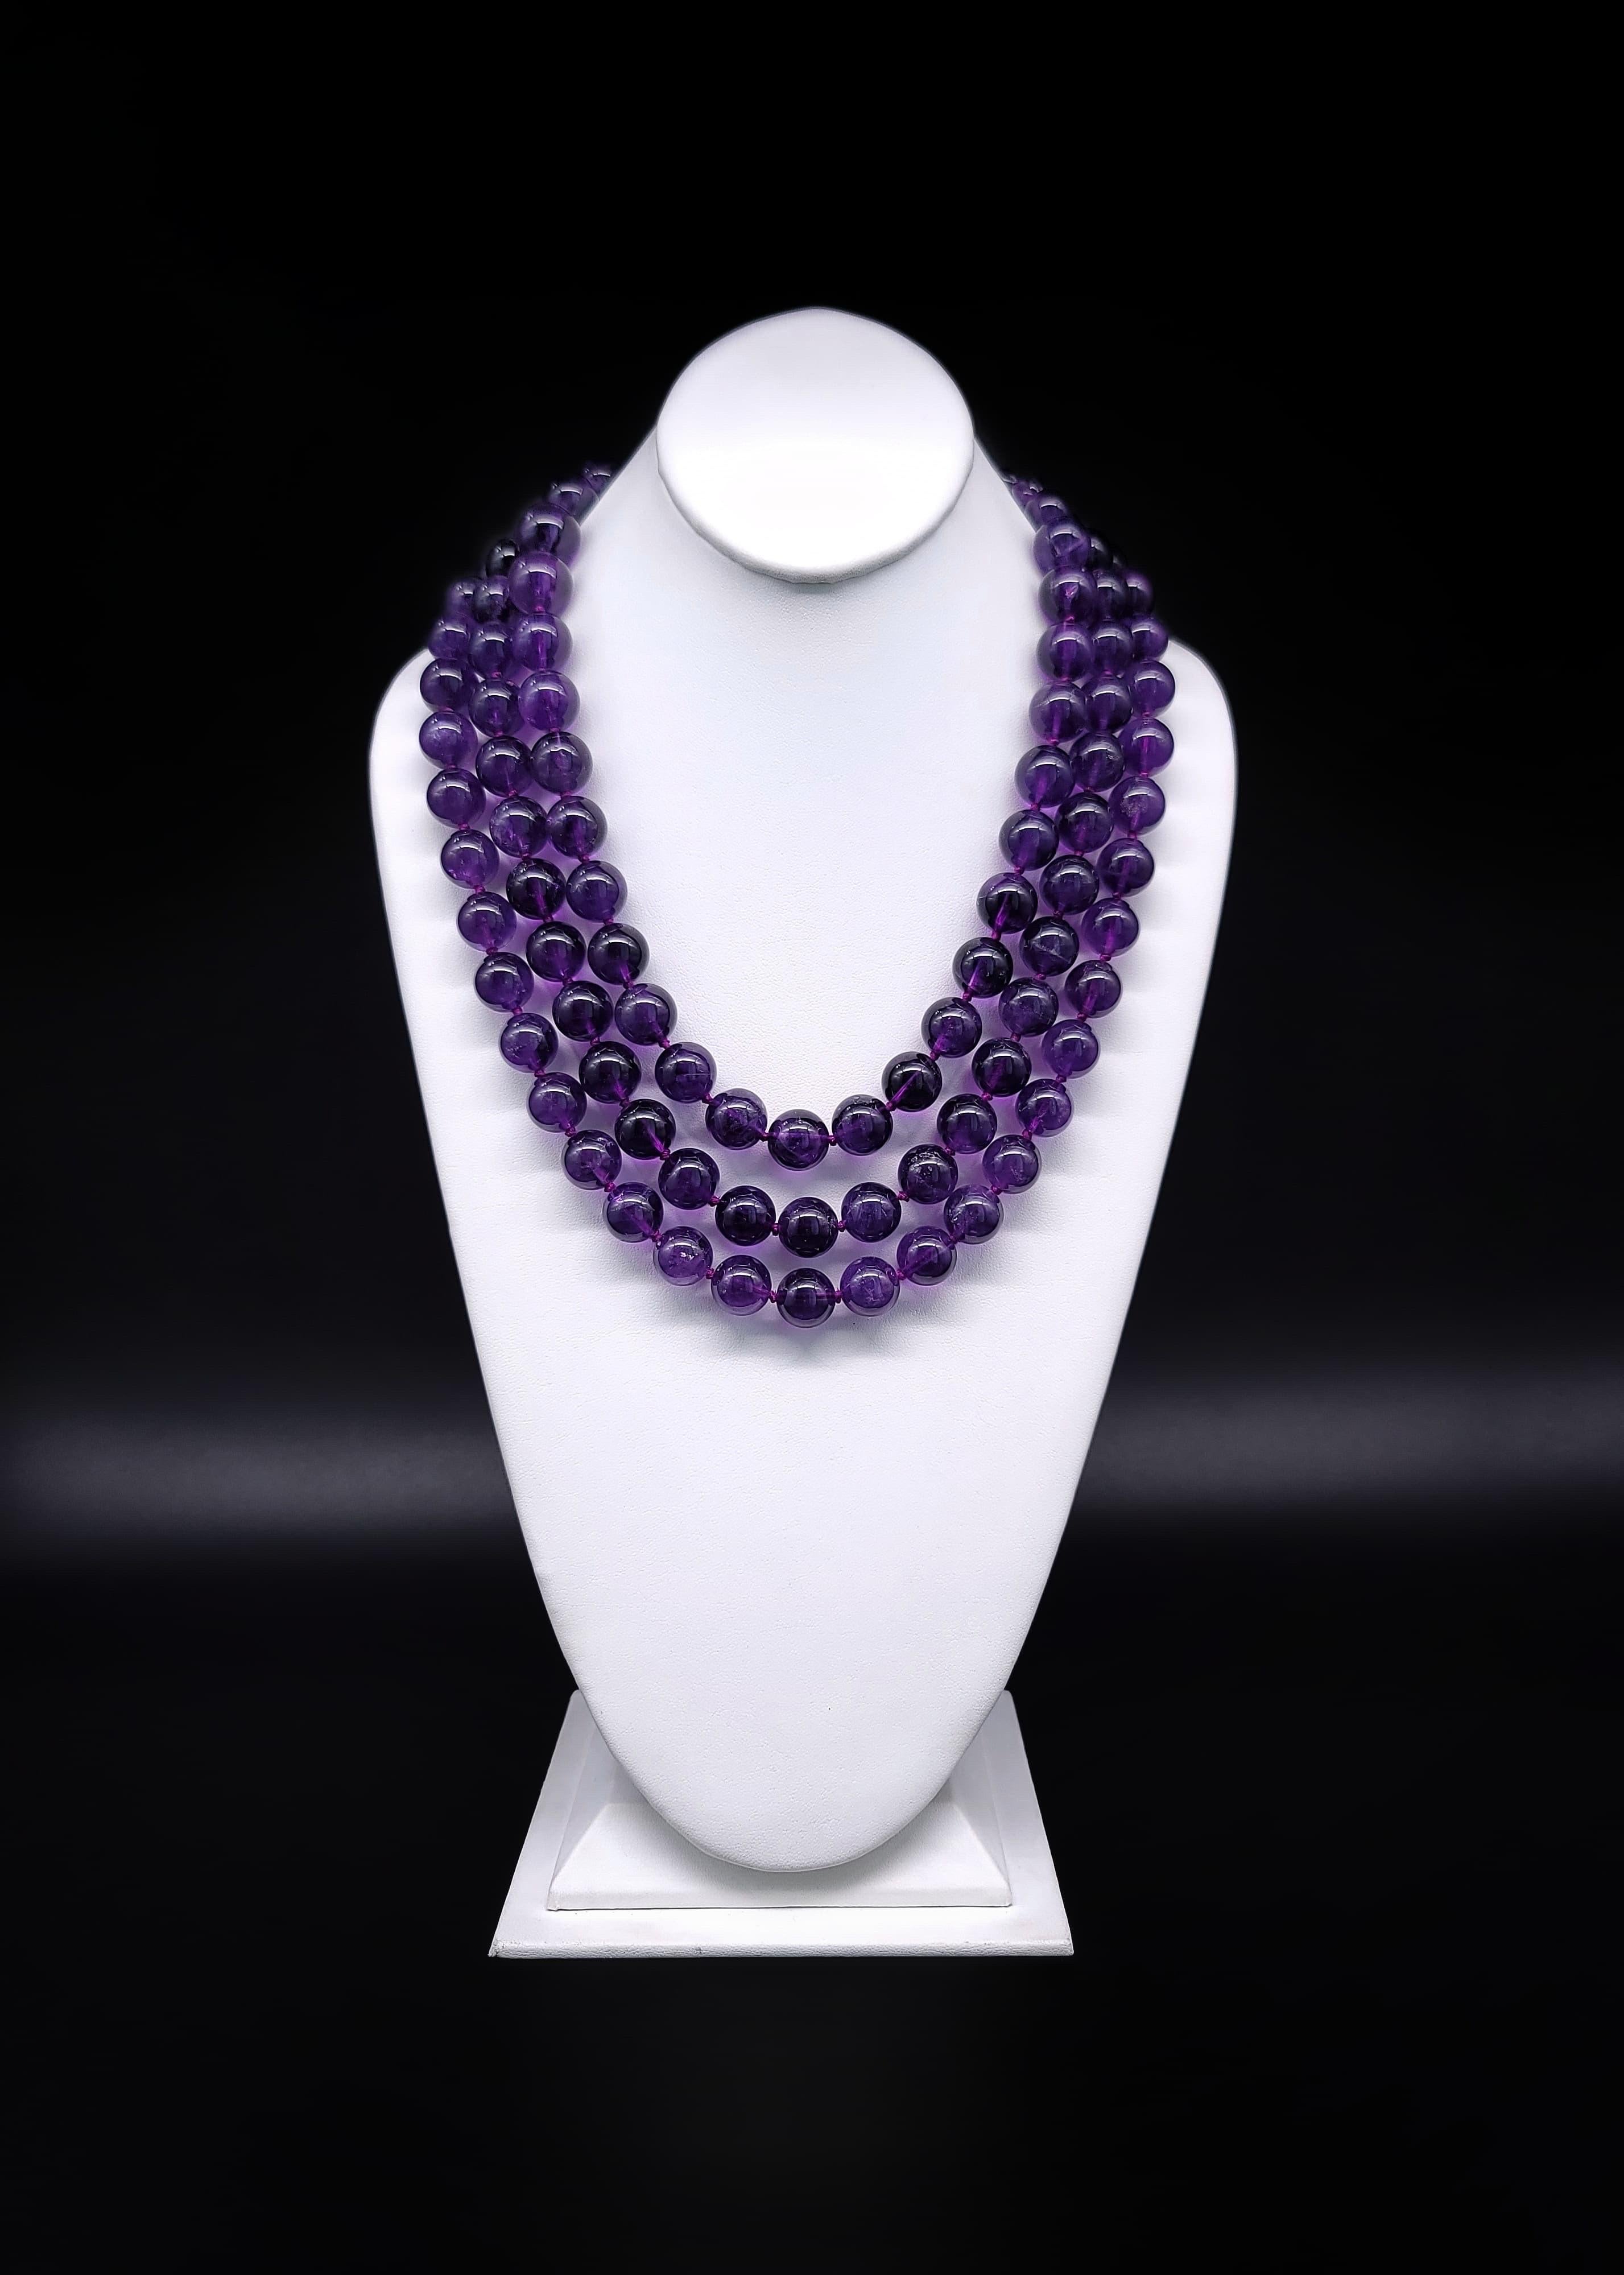 A.Jeschel  Amethyst necklace with a Vintage Venetian glass clasp. 13